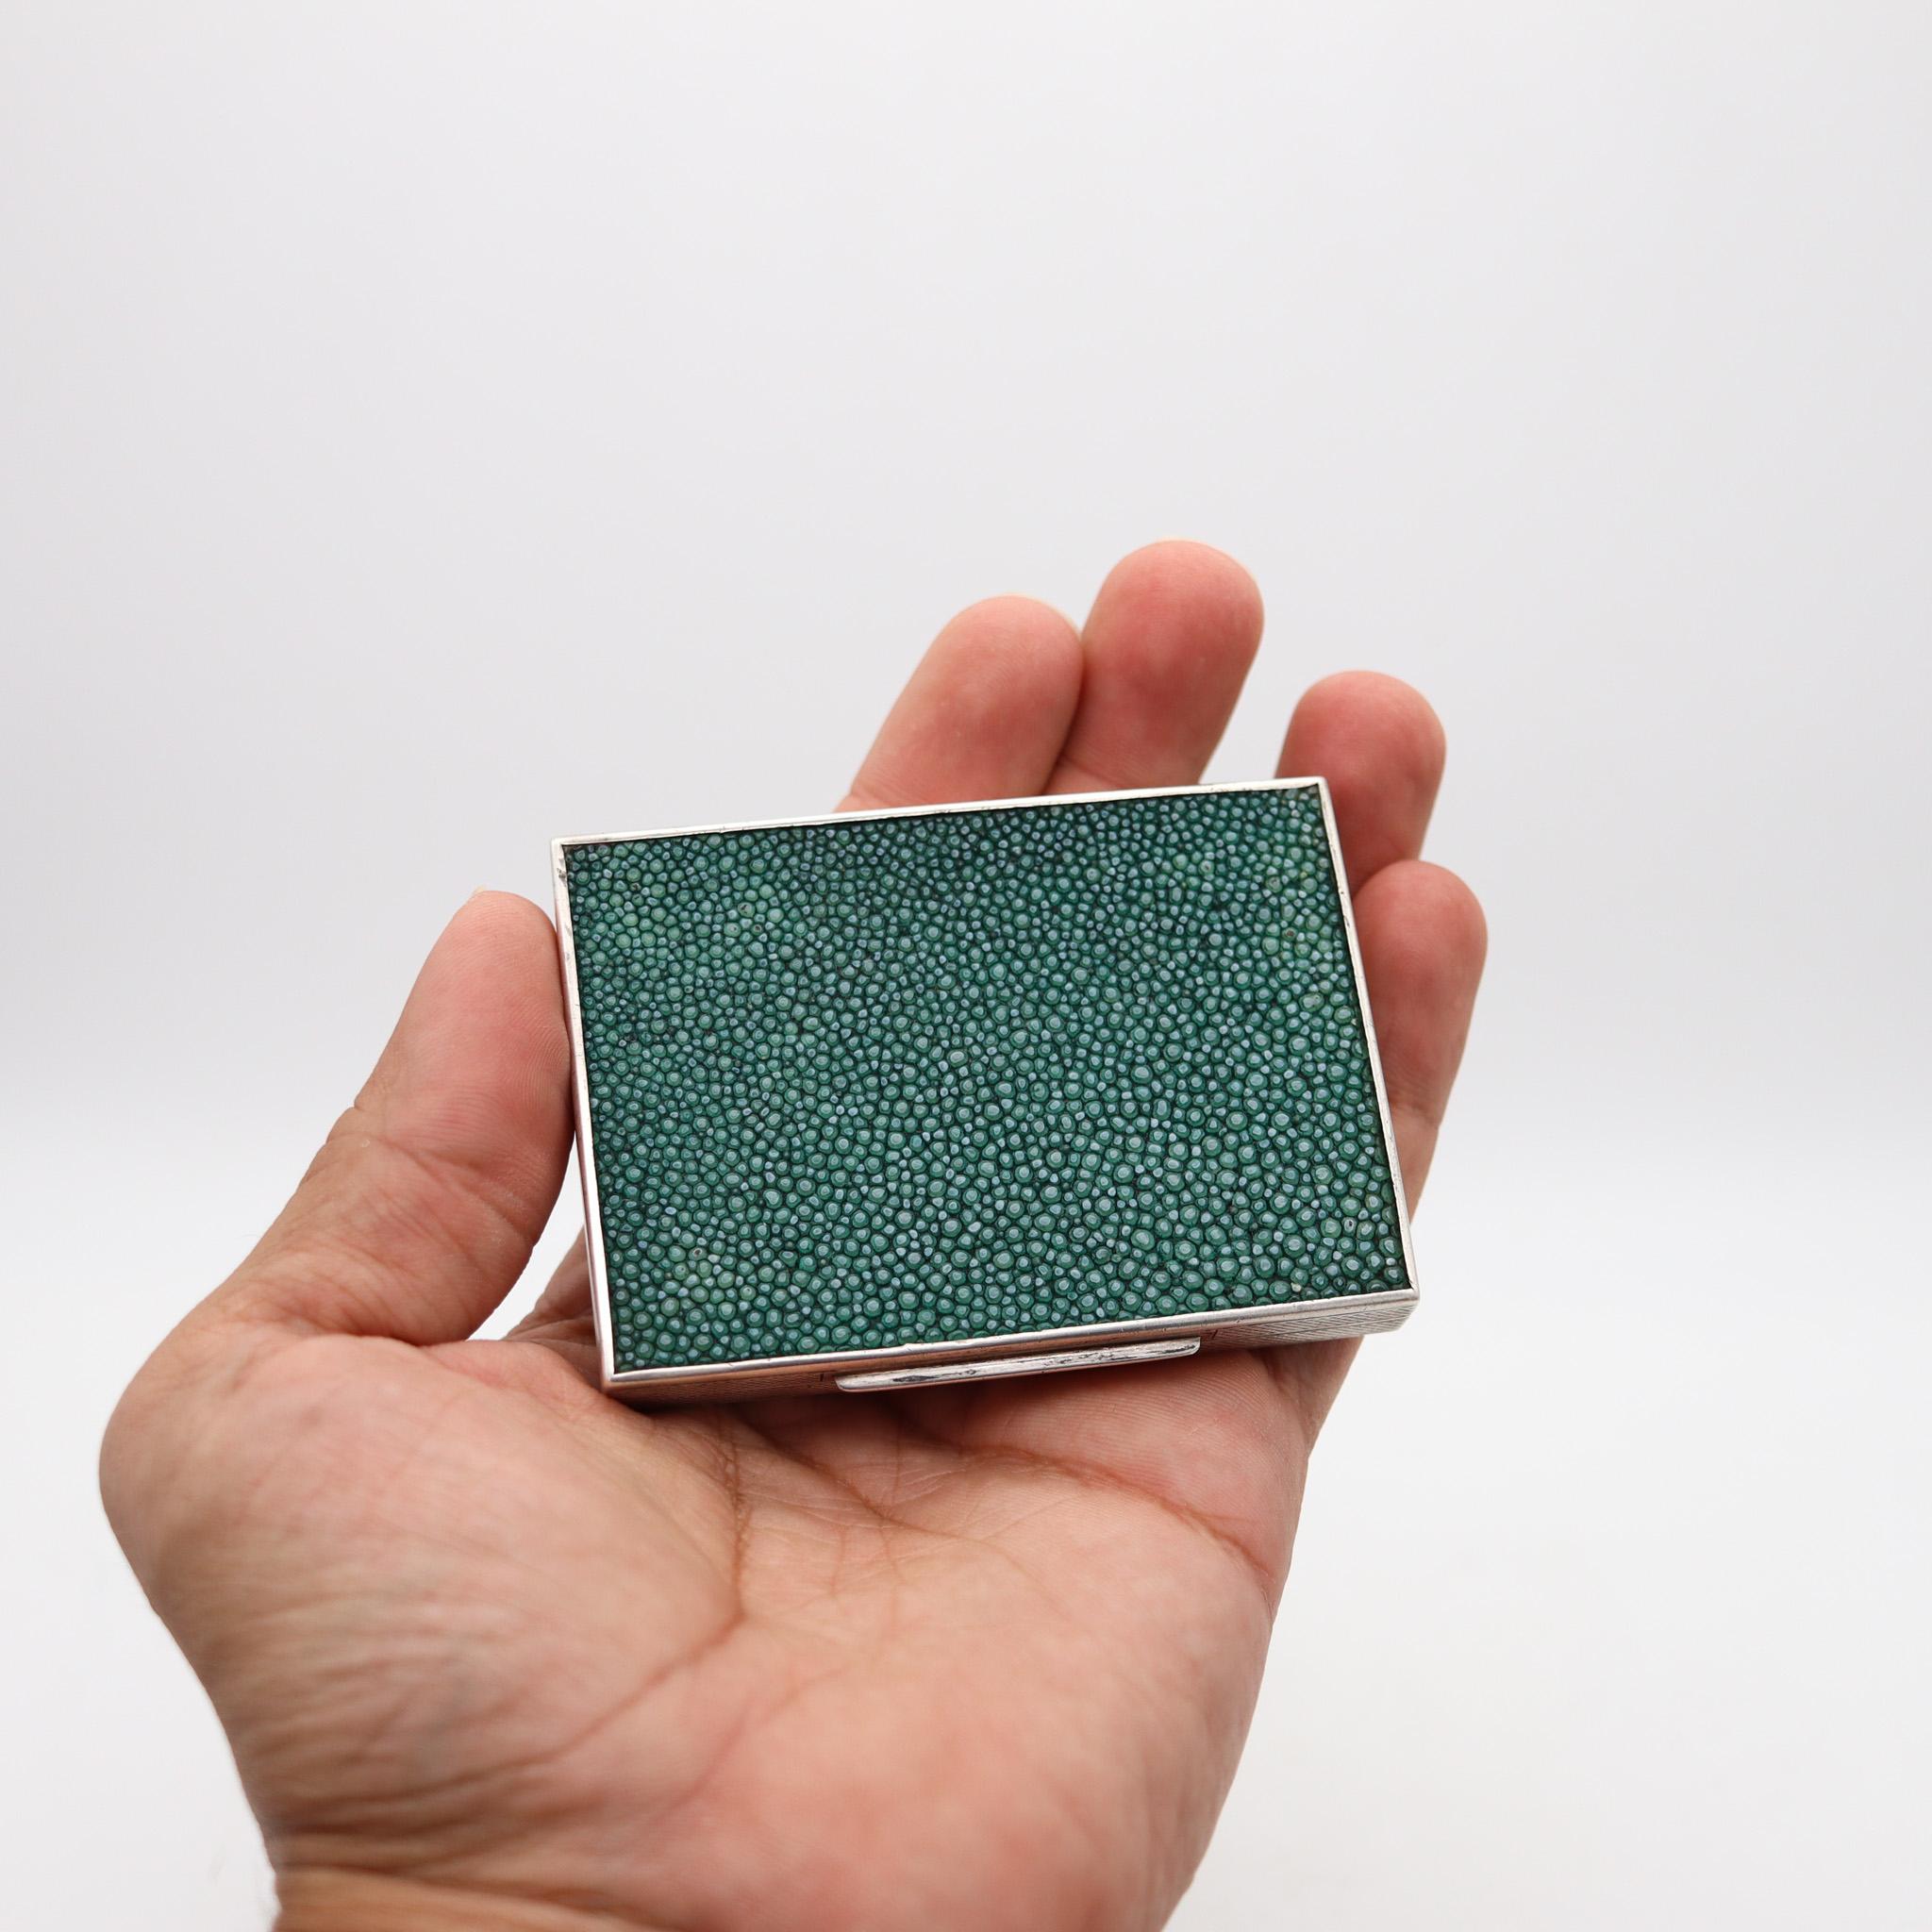 Silver Alfred Dunhill 1940 London Rectangular Box Case In .925 Sterling And Shagreen